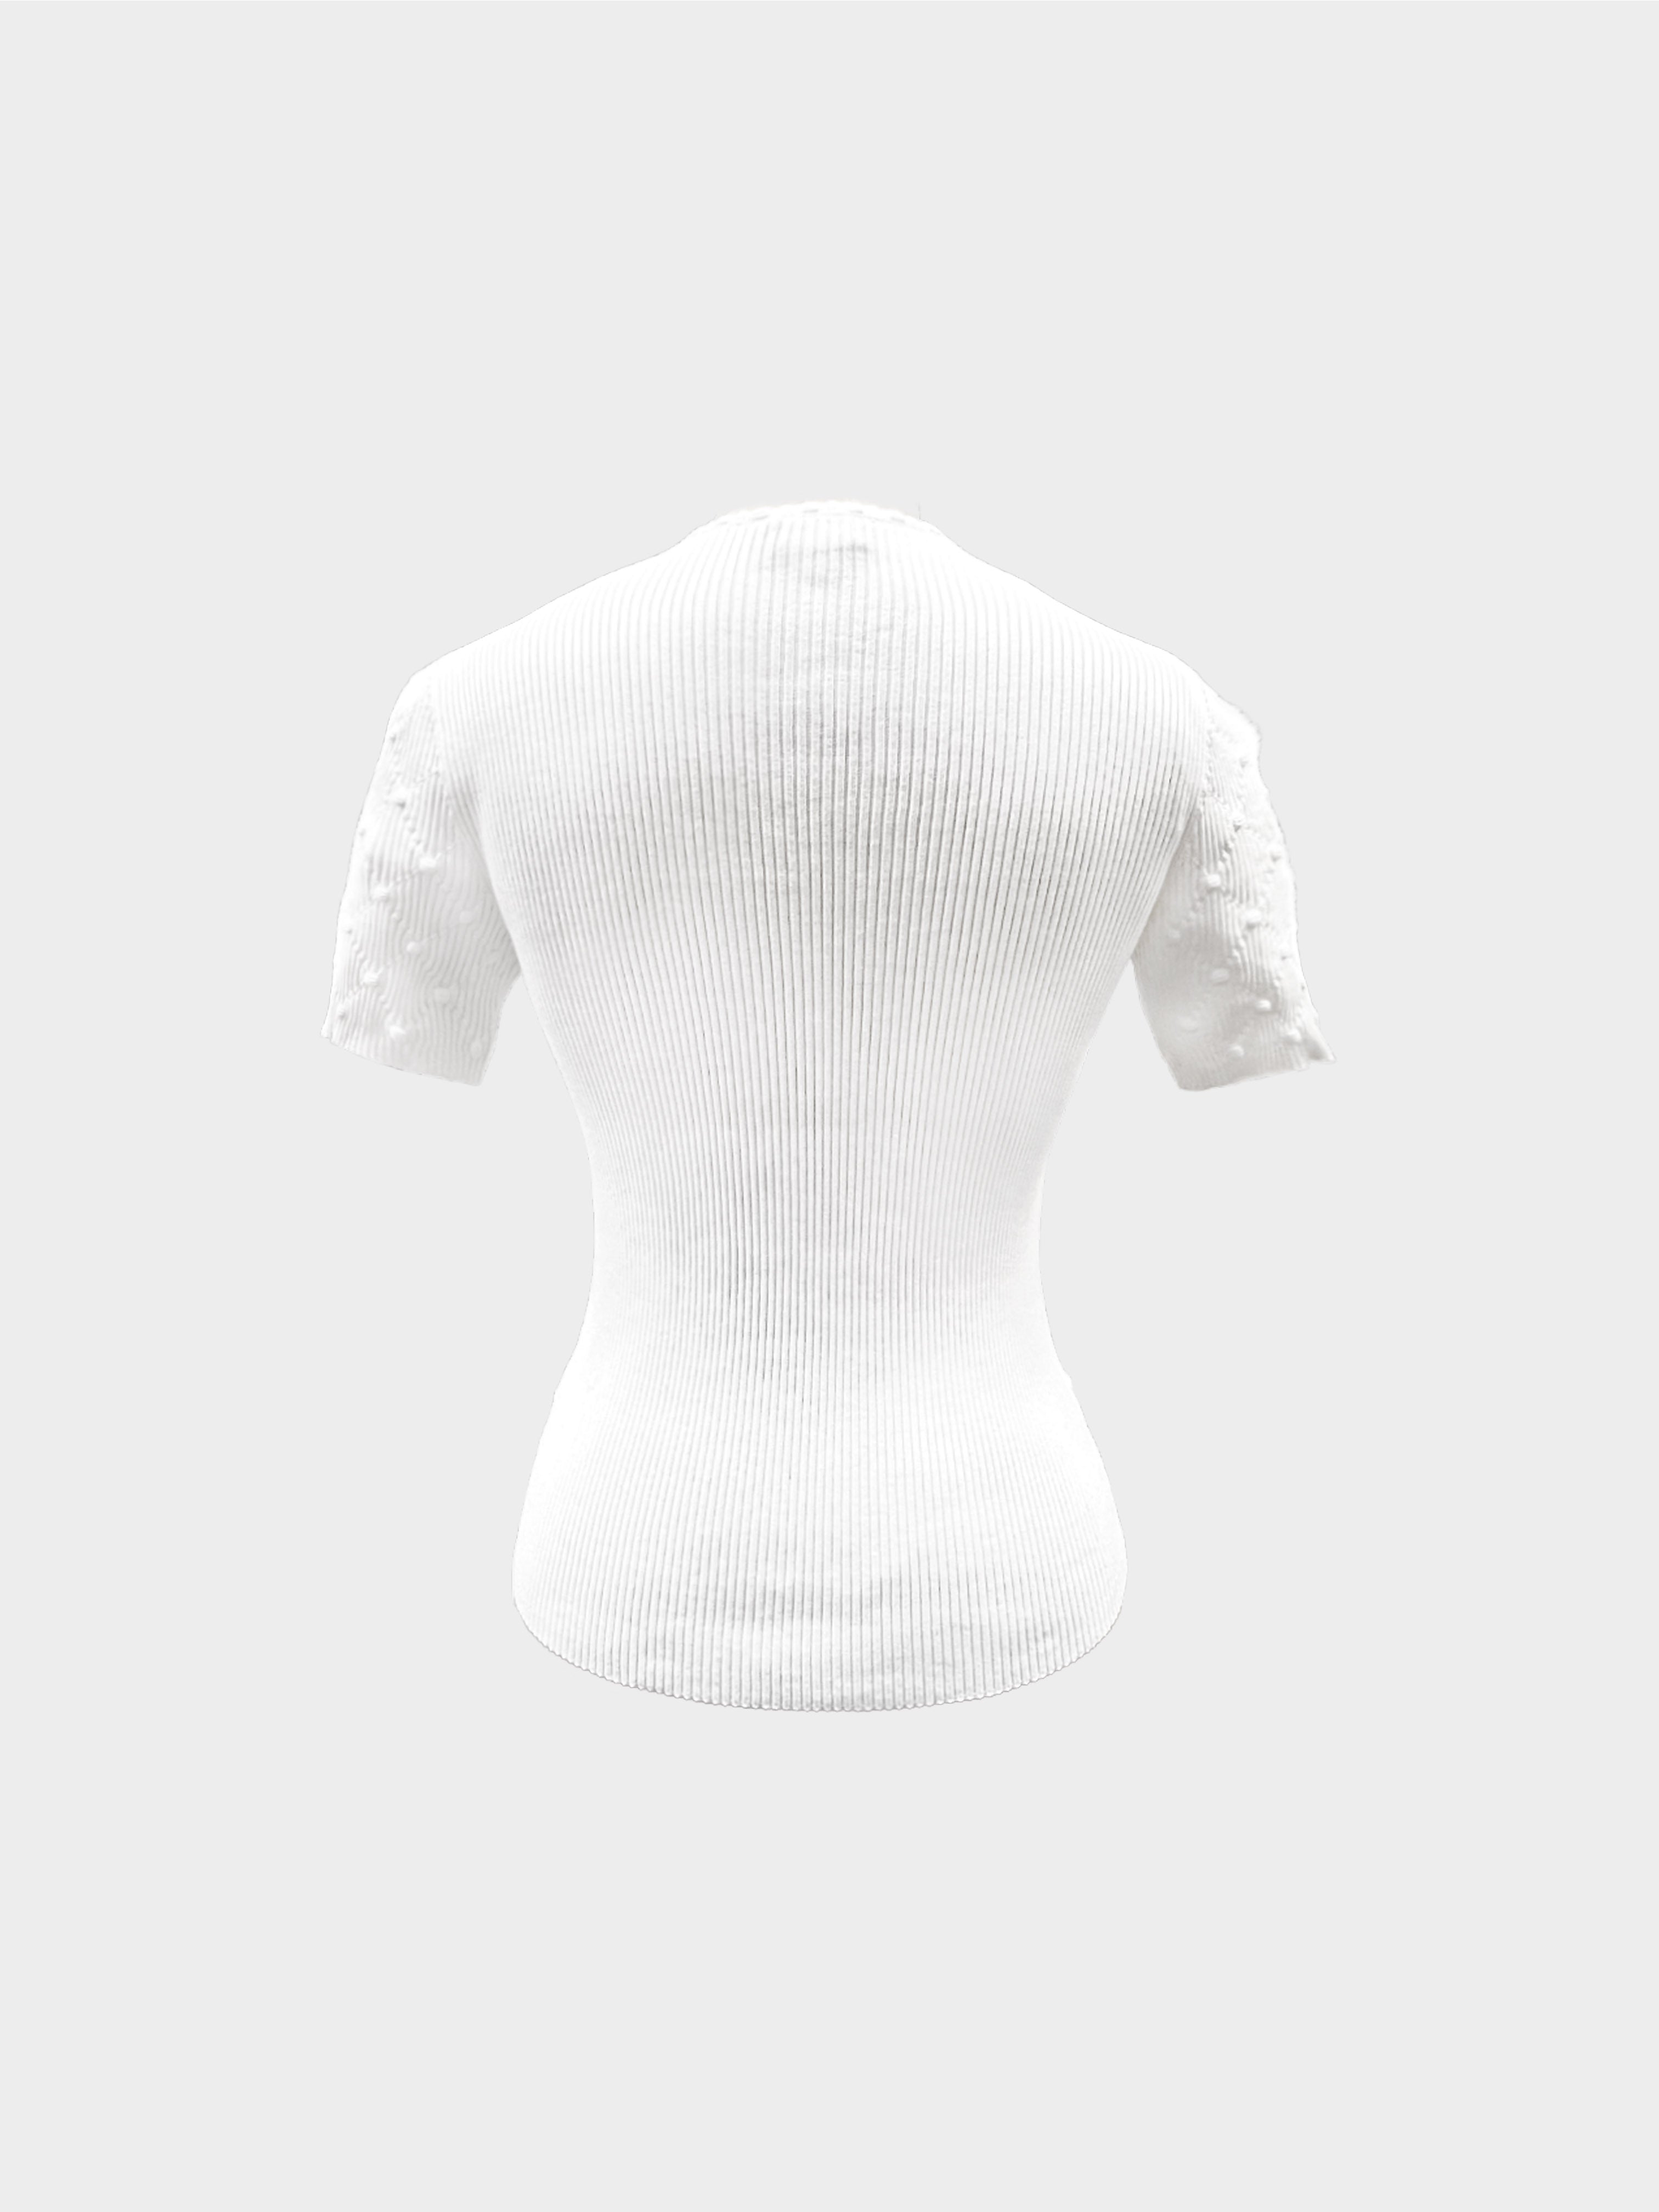 Chanel FW 2001 White Quilted Pattern Cotton Knit Top